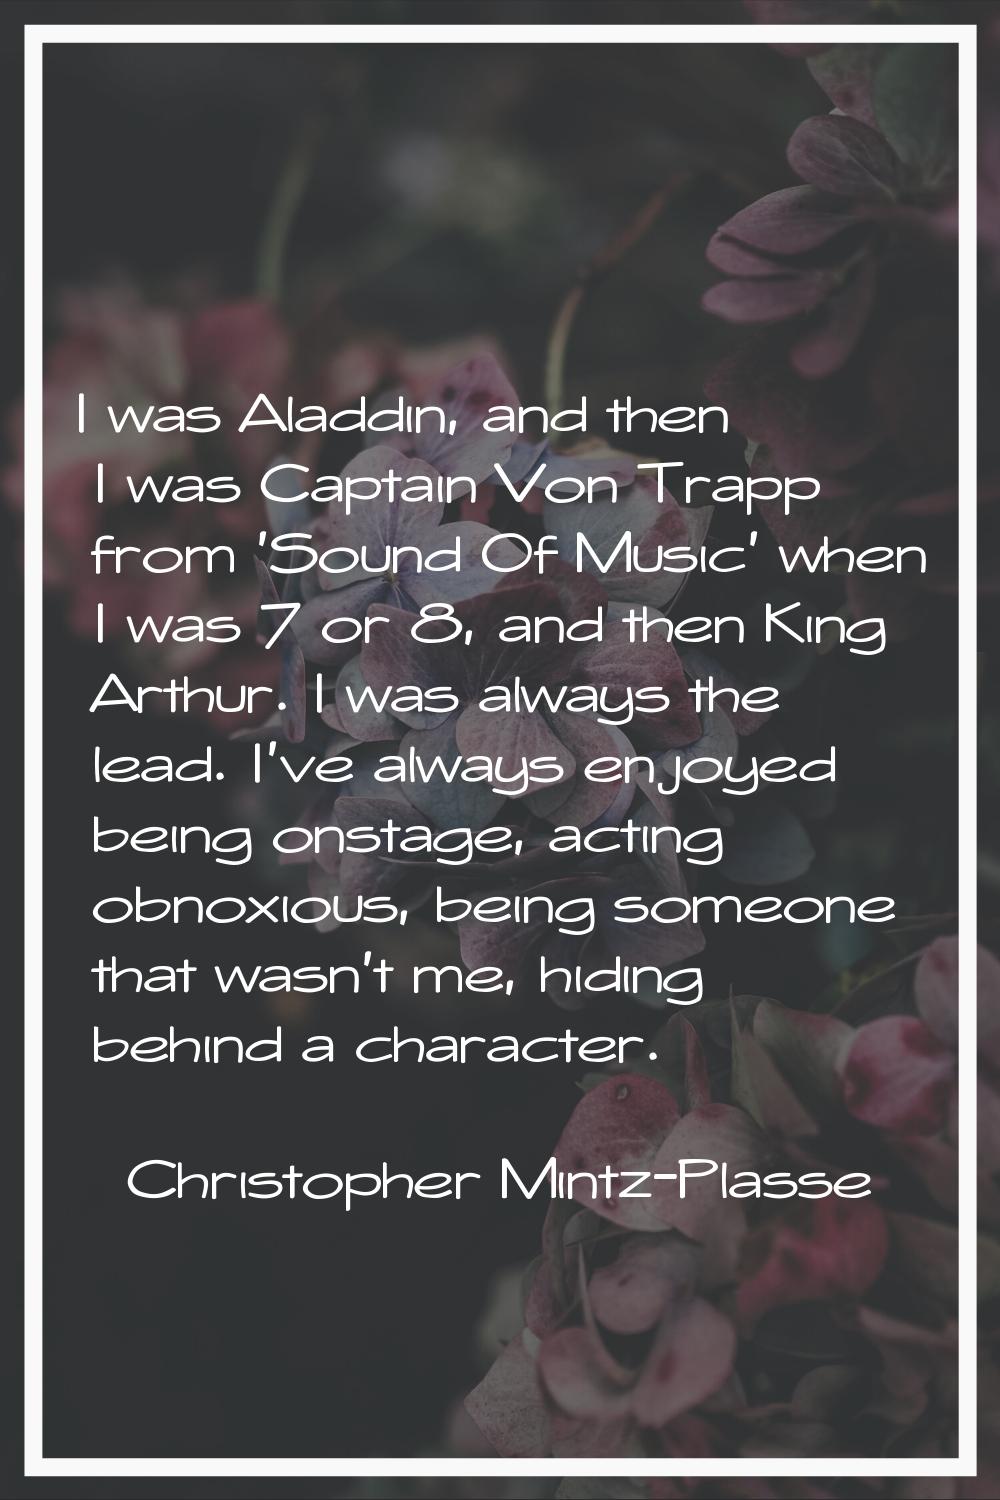 I was Aladdin, and then I was Captain Von Trapp from 'Sound Of Music' when I was 7 or 8, and then K